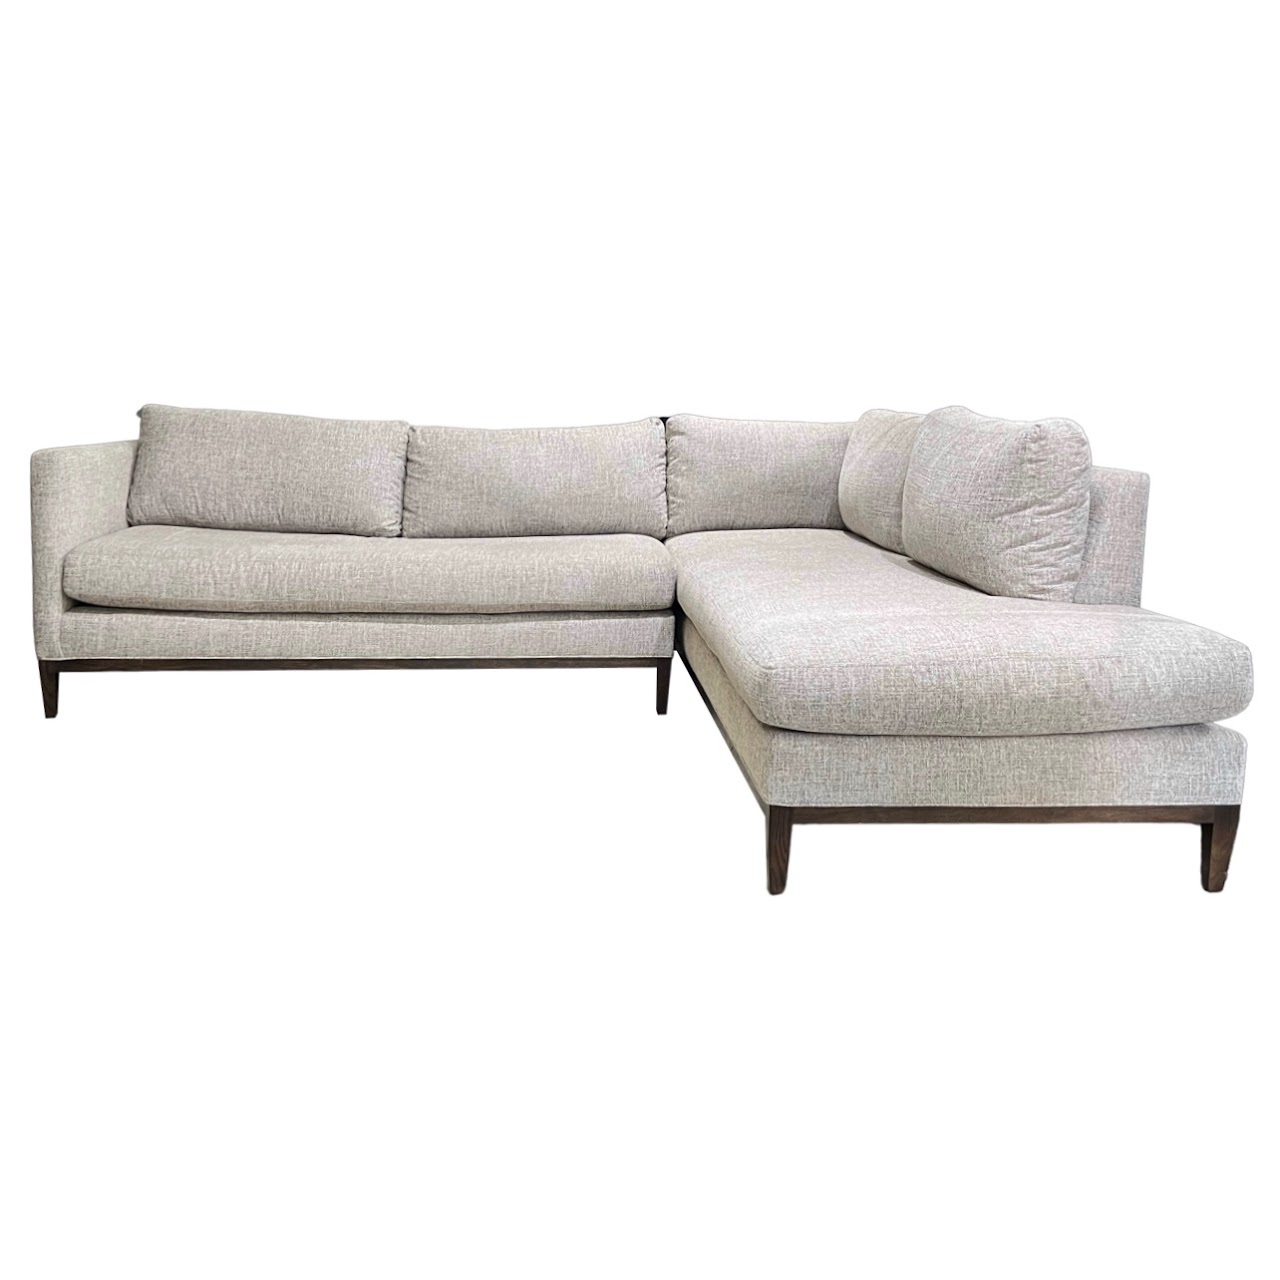 American Home Two Piece Sectional Sofa